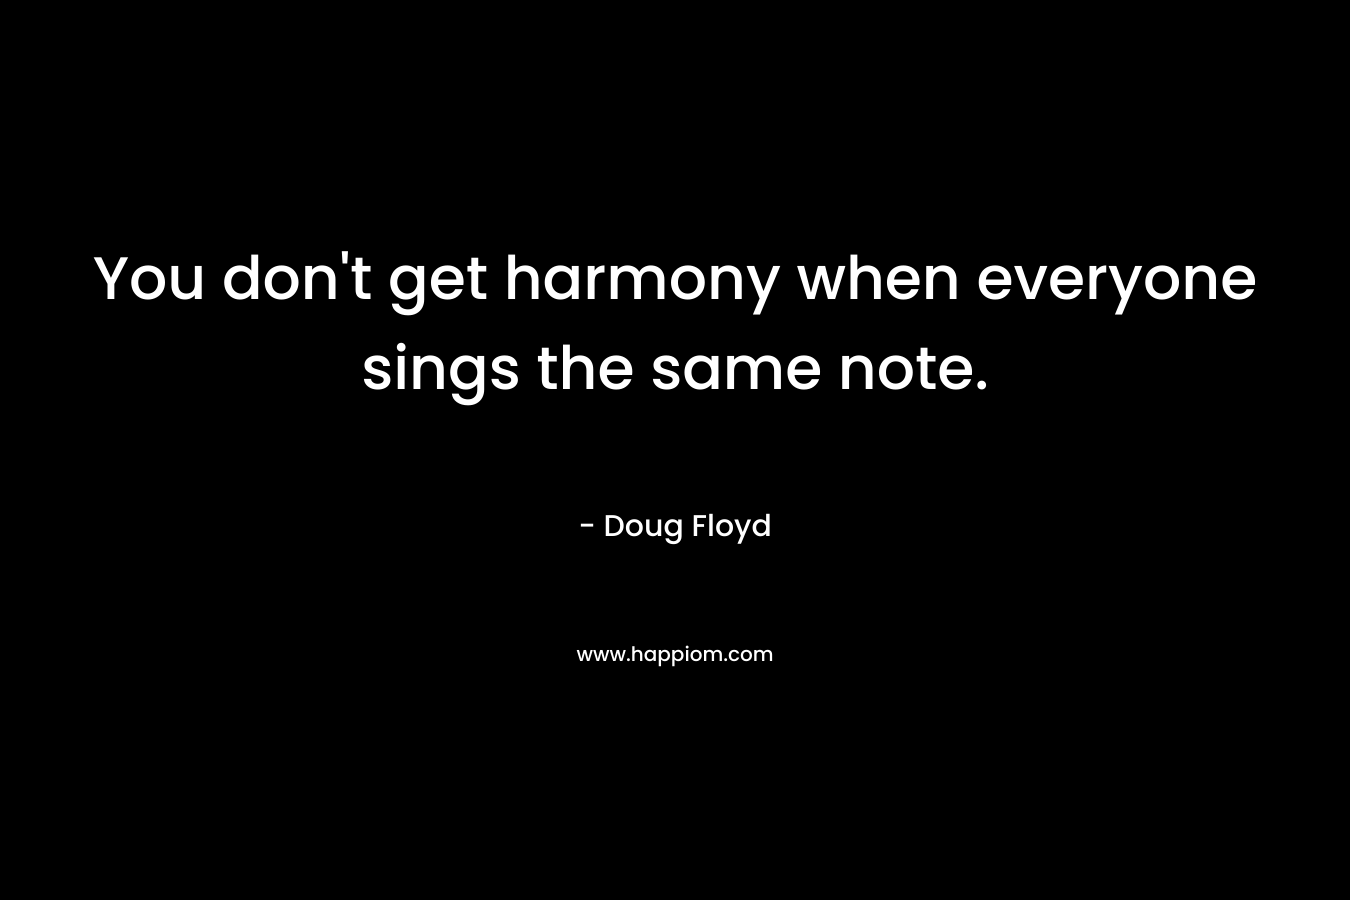 You don’t get harmony when everyone sings the same note. – Doug Floyd